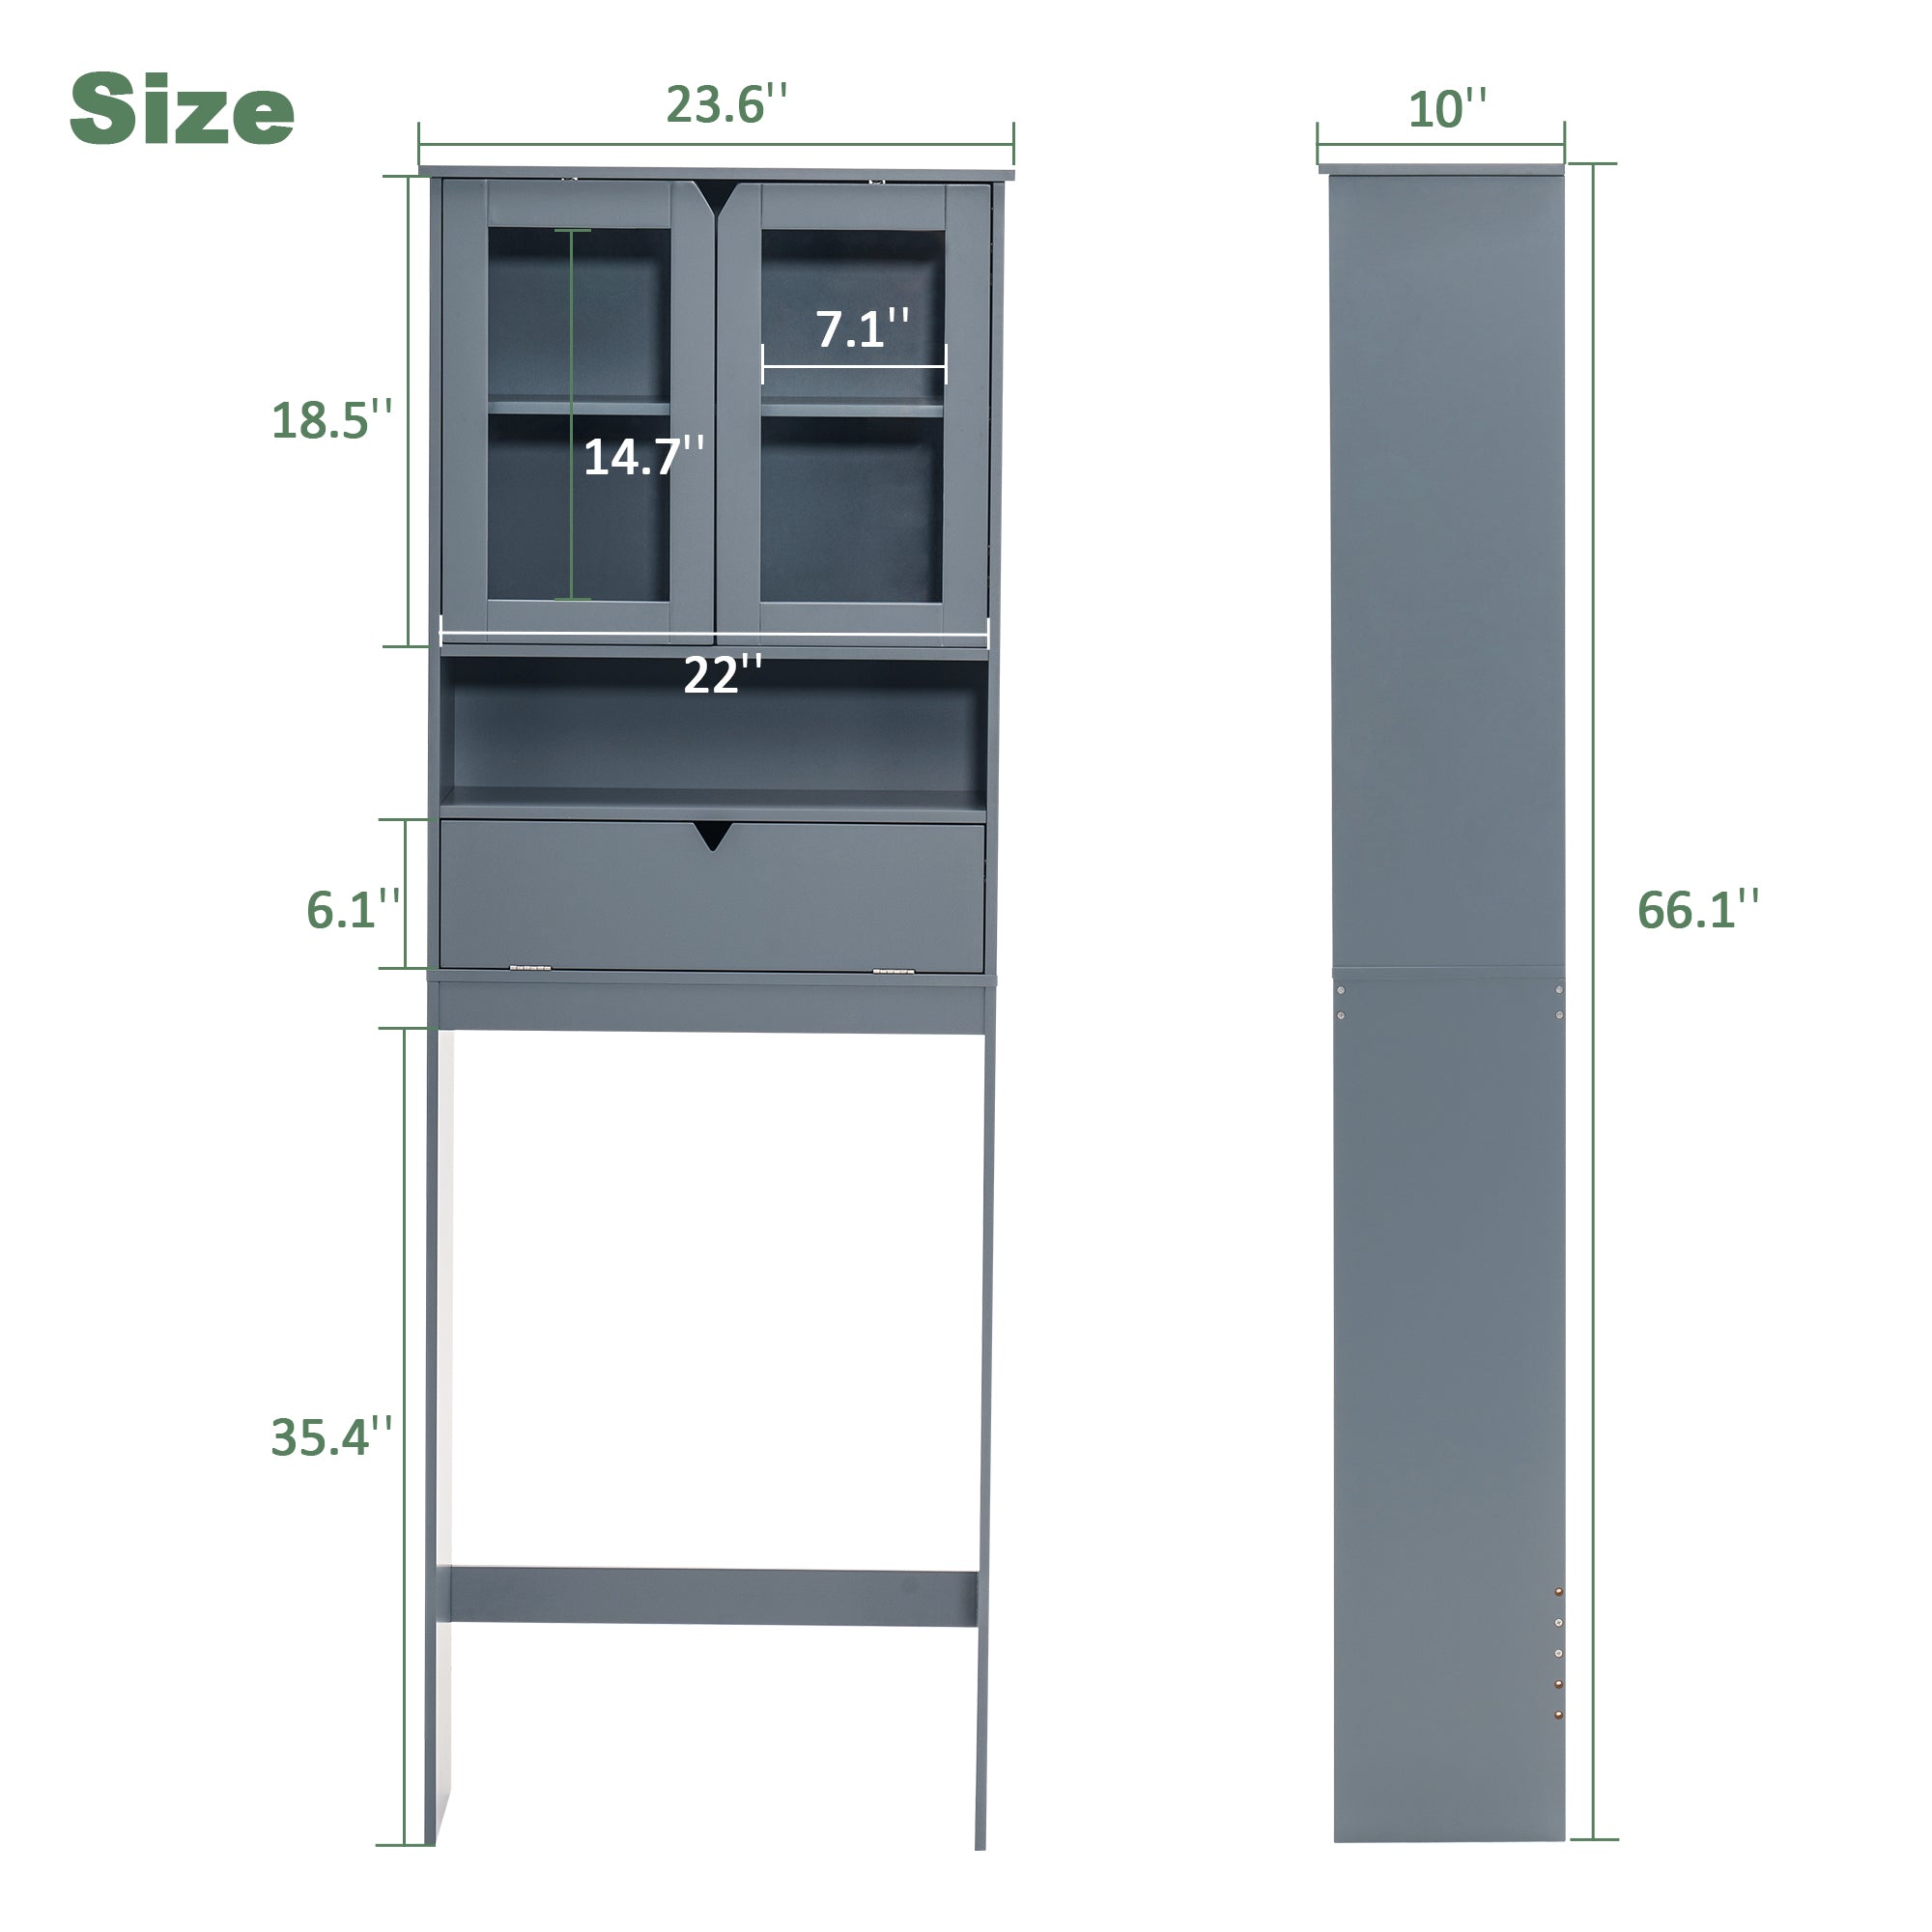 Ivinta Over The Toilet Bathroom Storage Cabinet with Adjustable Shelf, Space-Saving Wall Mounted Rack